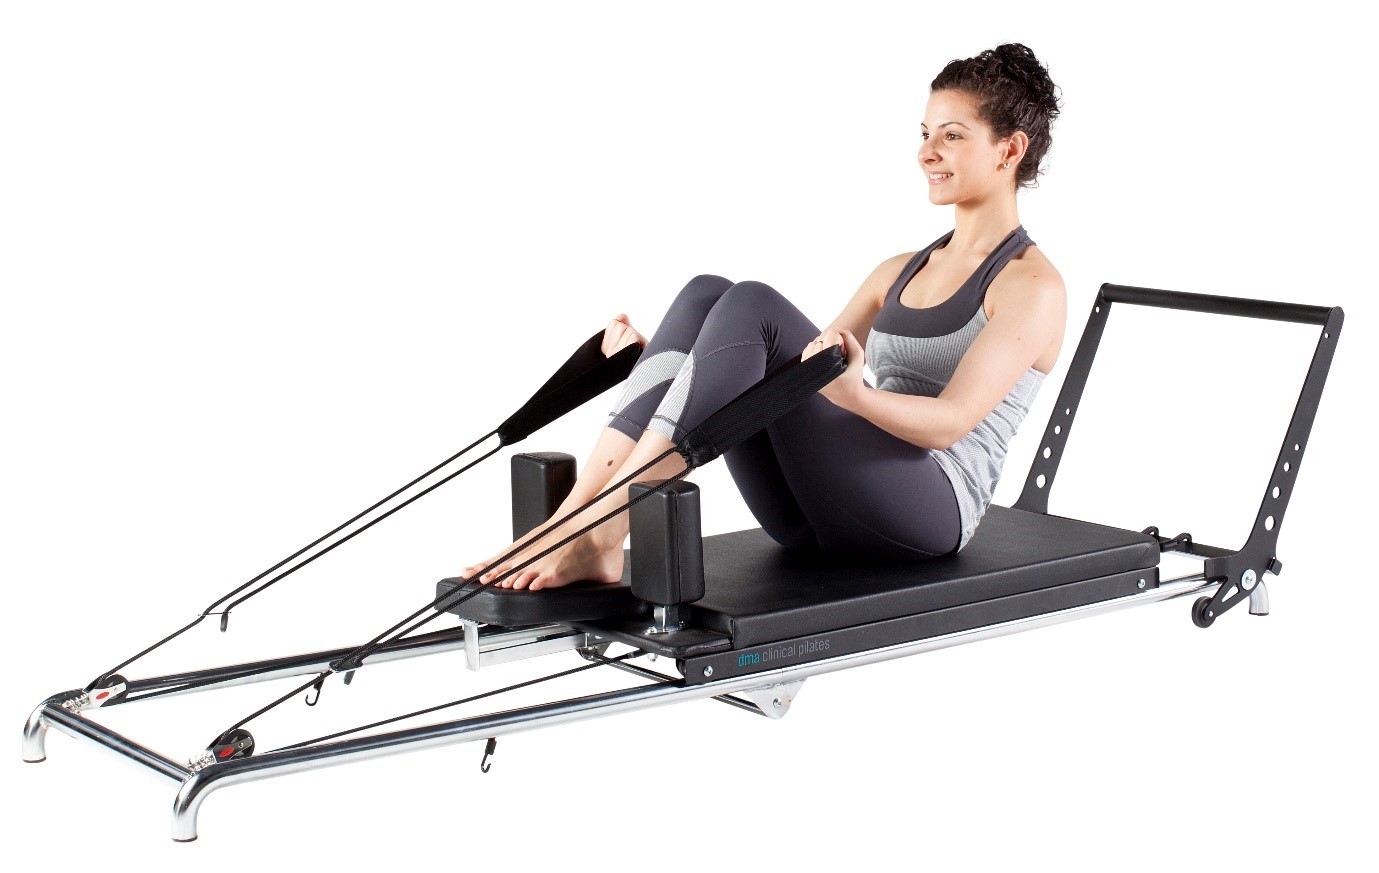 Know more about Clinical Pilates